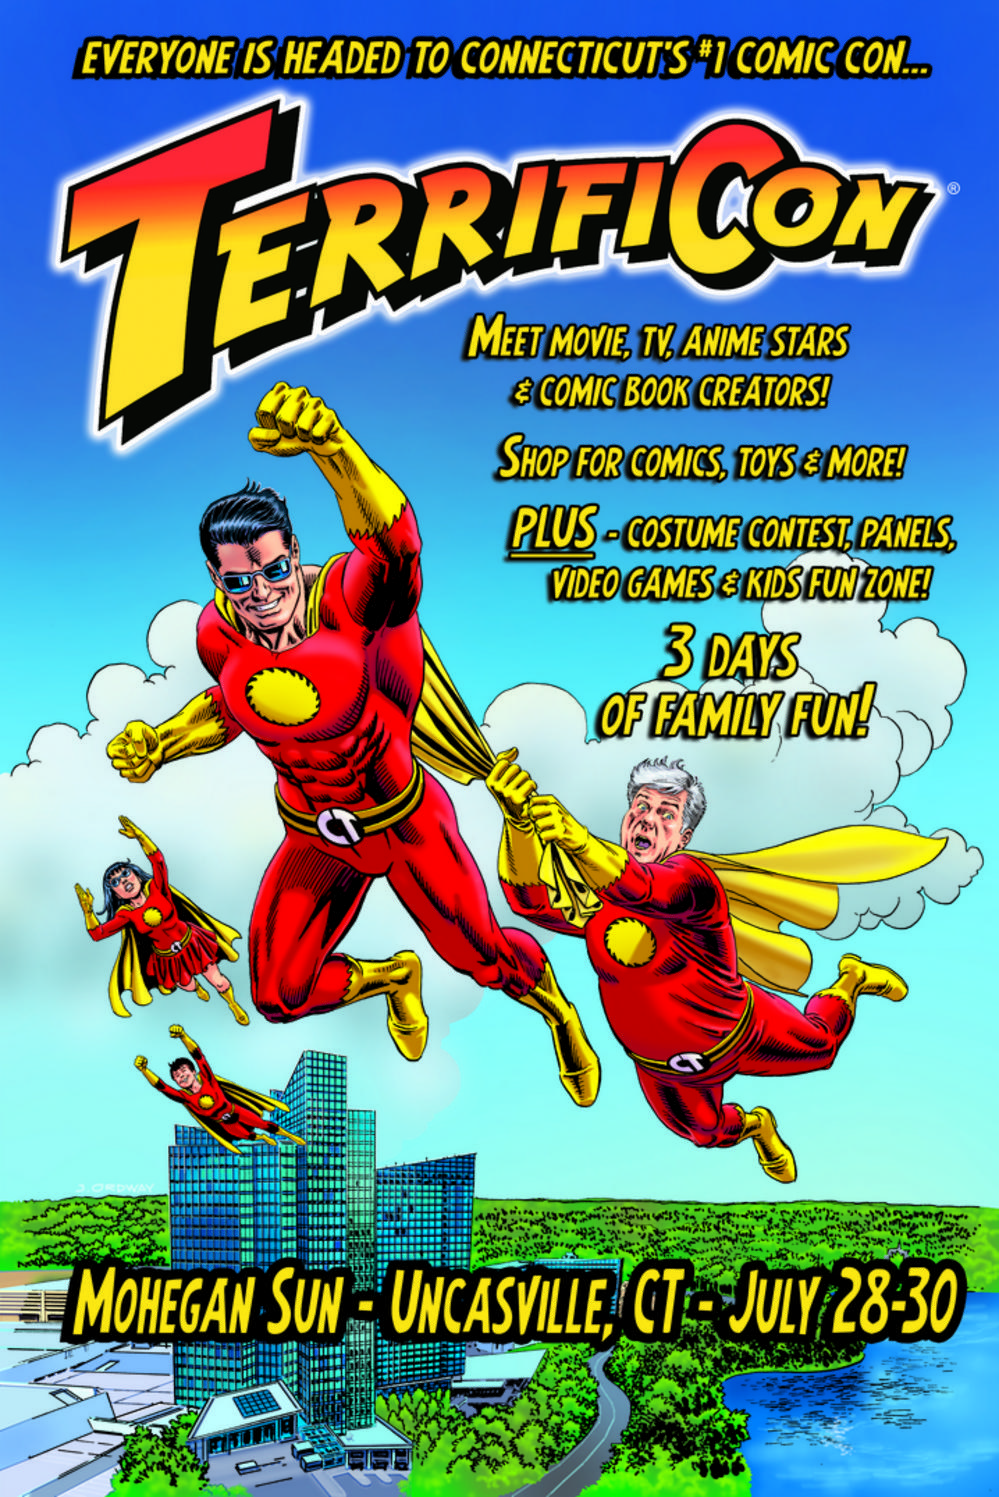 GO TO TERRIFICON - CT'S NUMBER ONE COMIC CON SINCE 2012